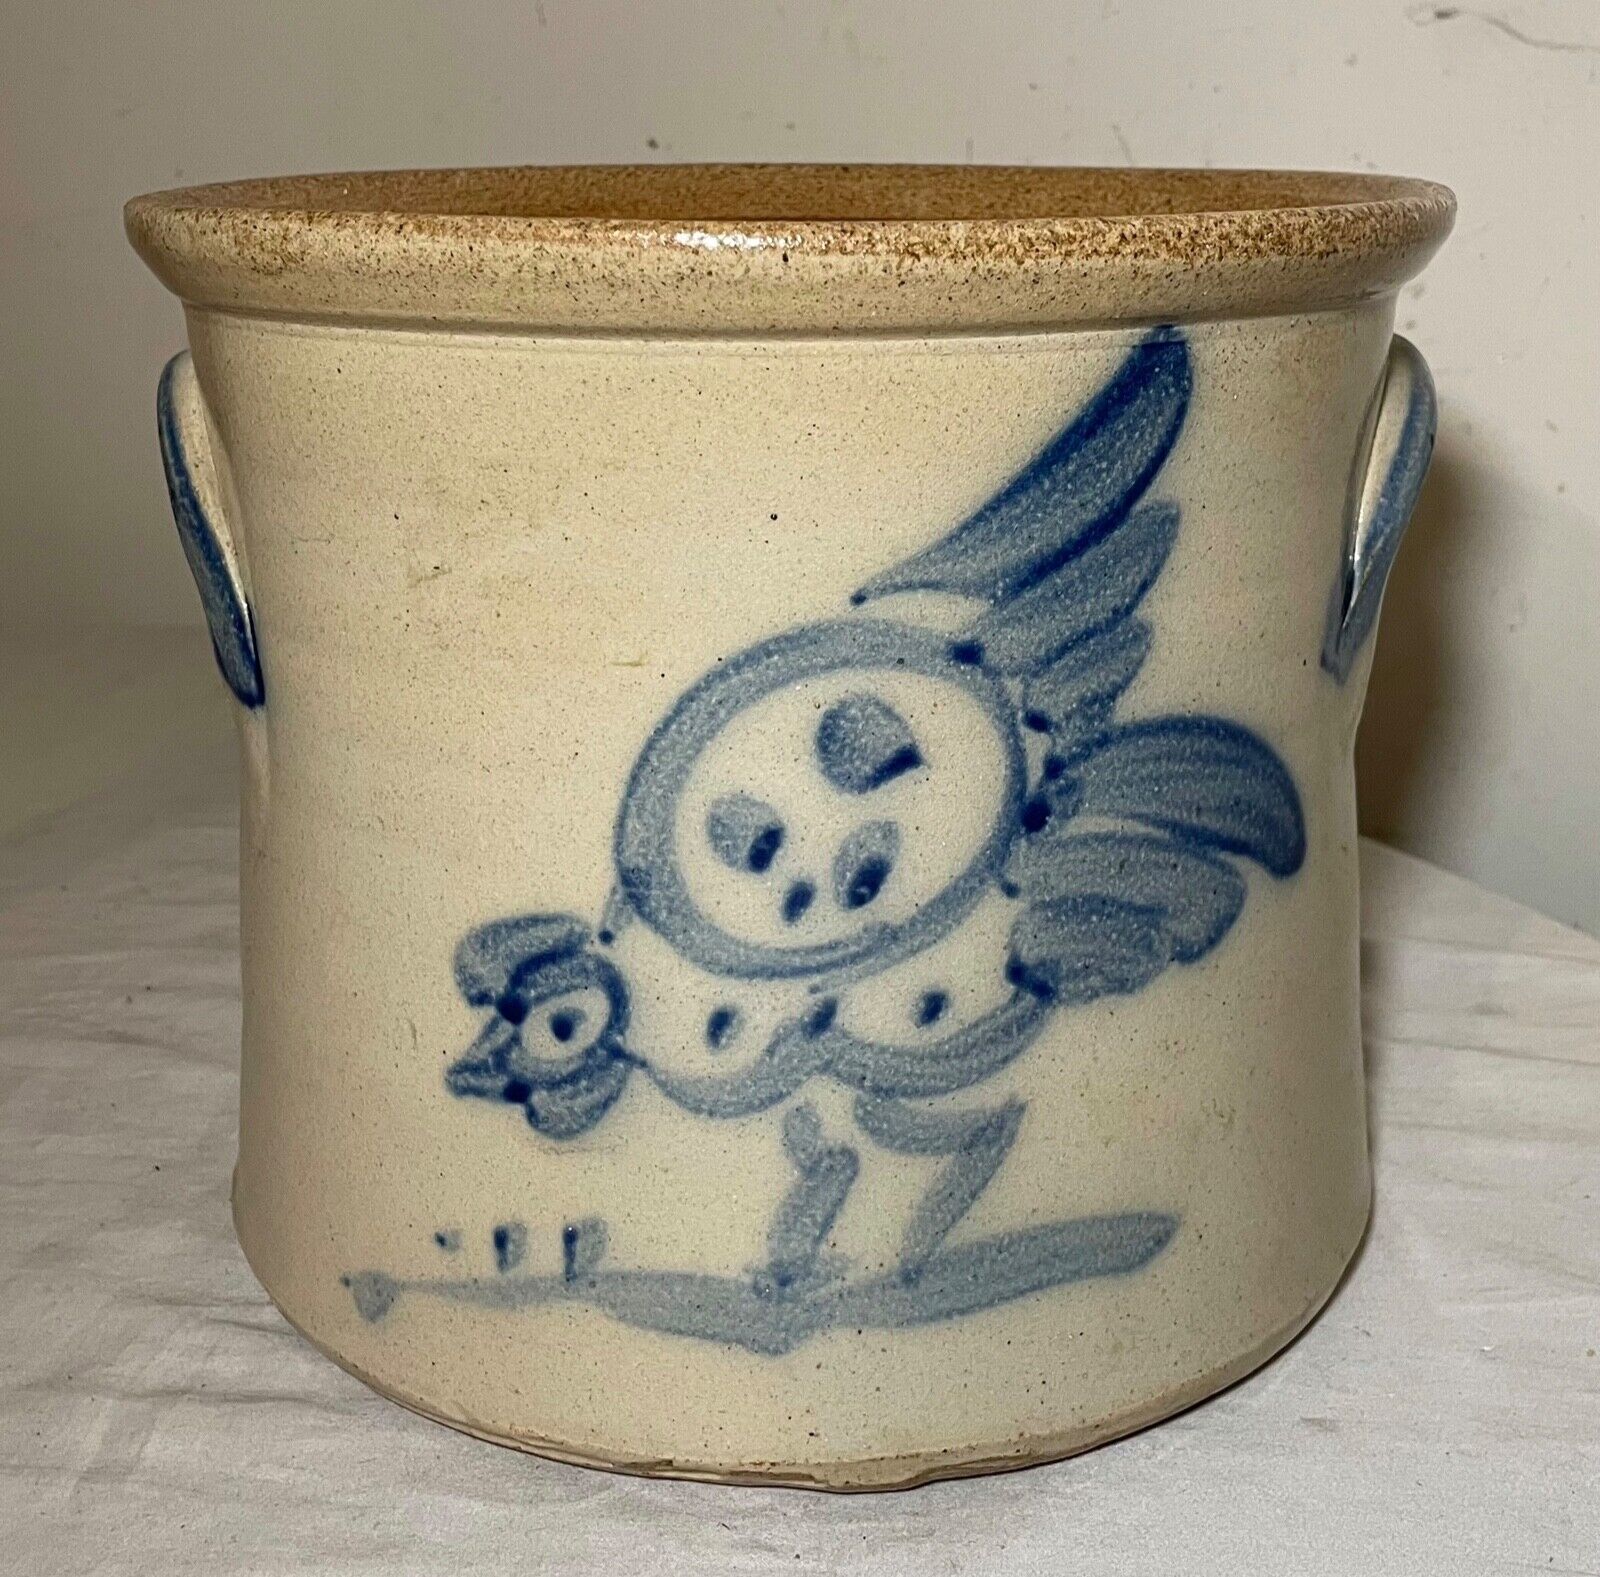 antique handmade parrot on plum stoneware crock pottery jug with handle